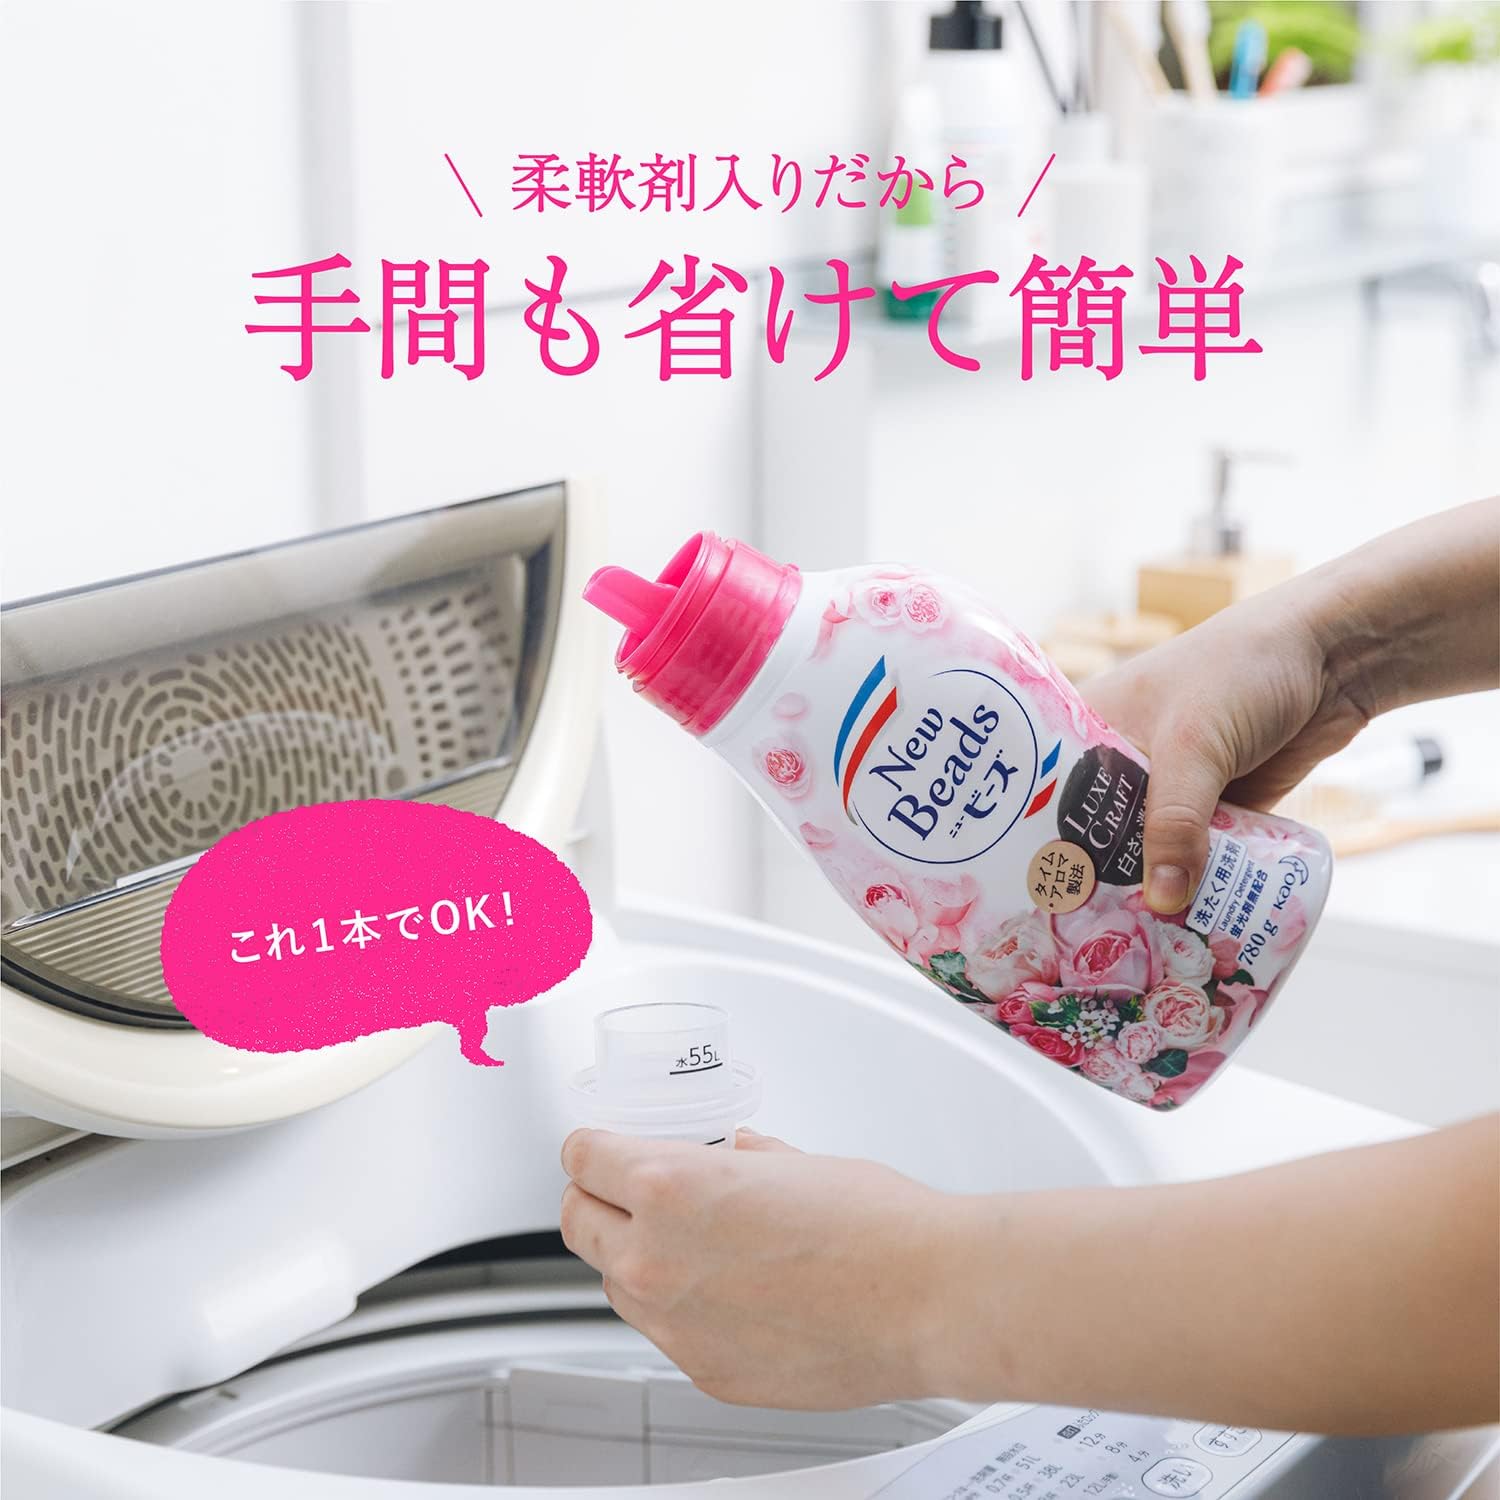 Kao Laundry Detergent Luxe Craft 780g - Kao | Kiokii and...